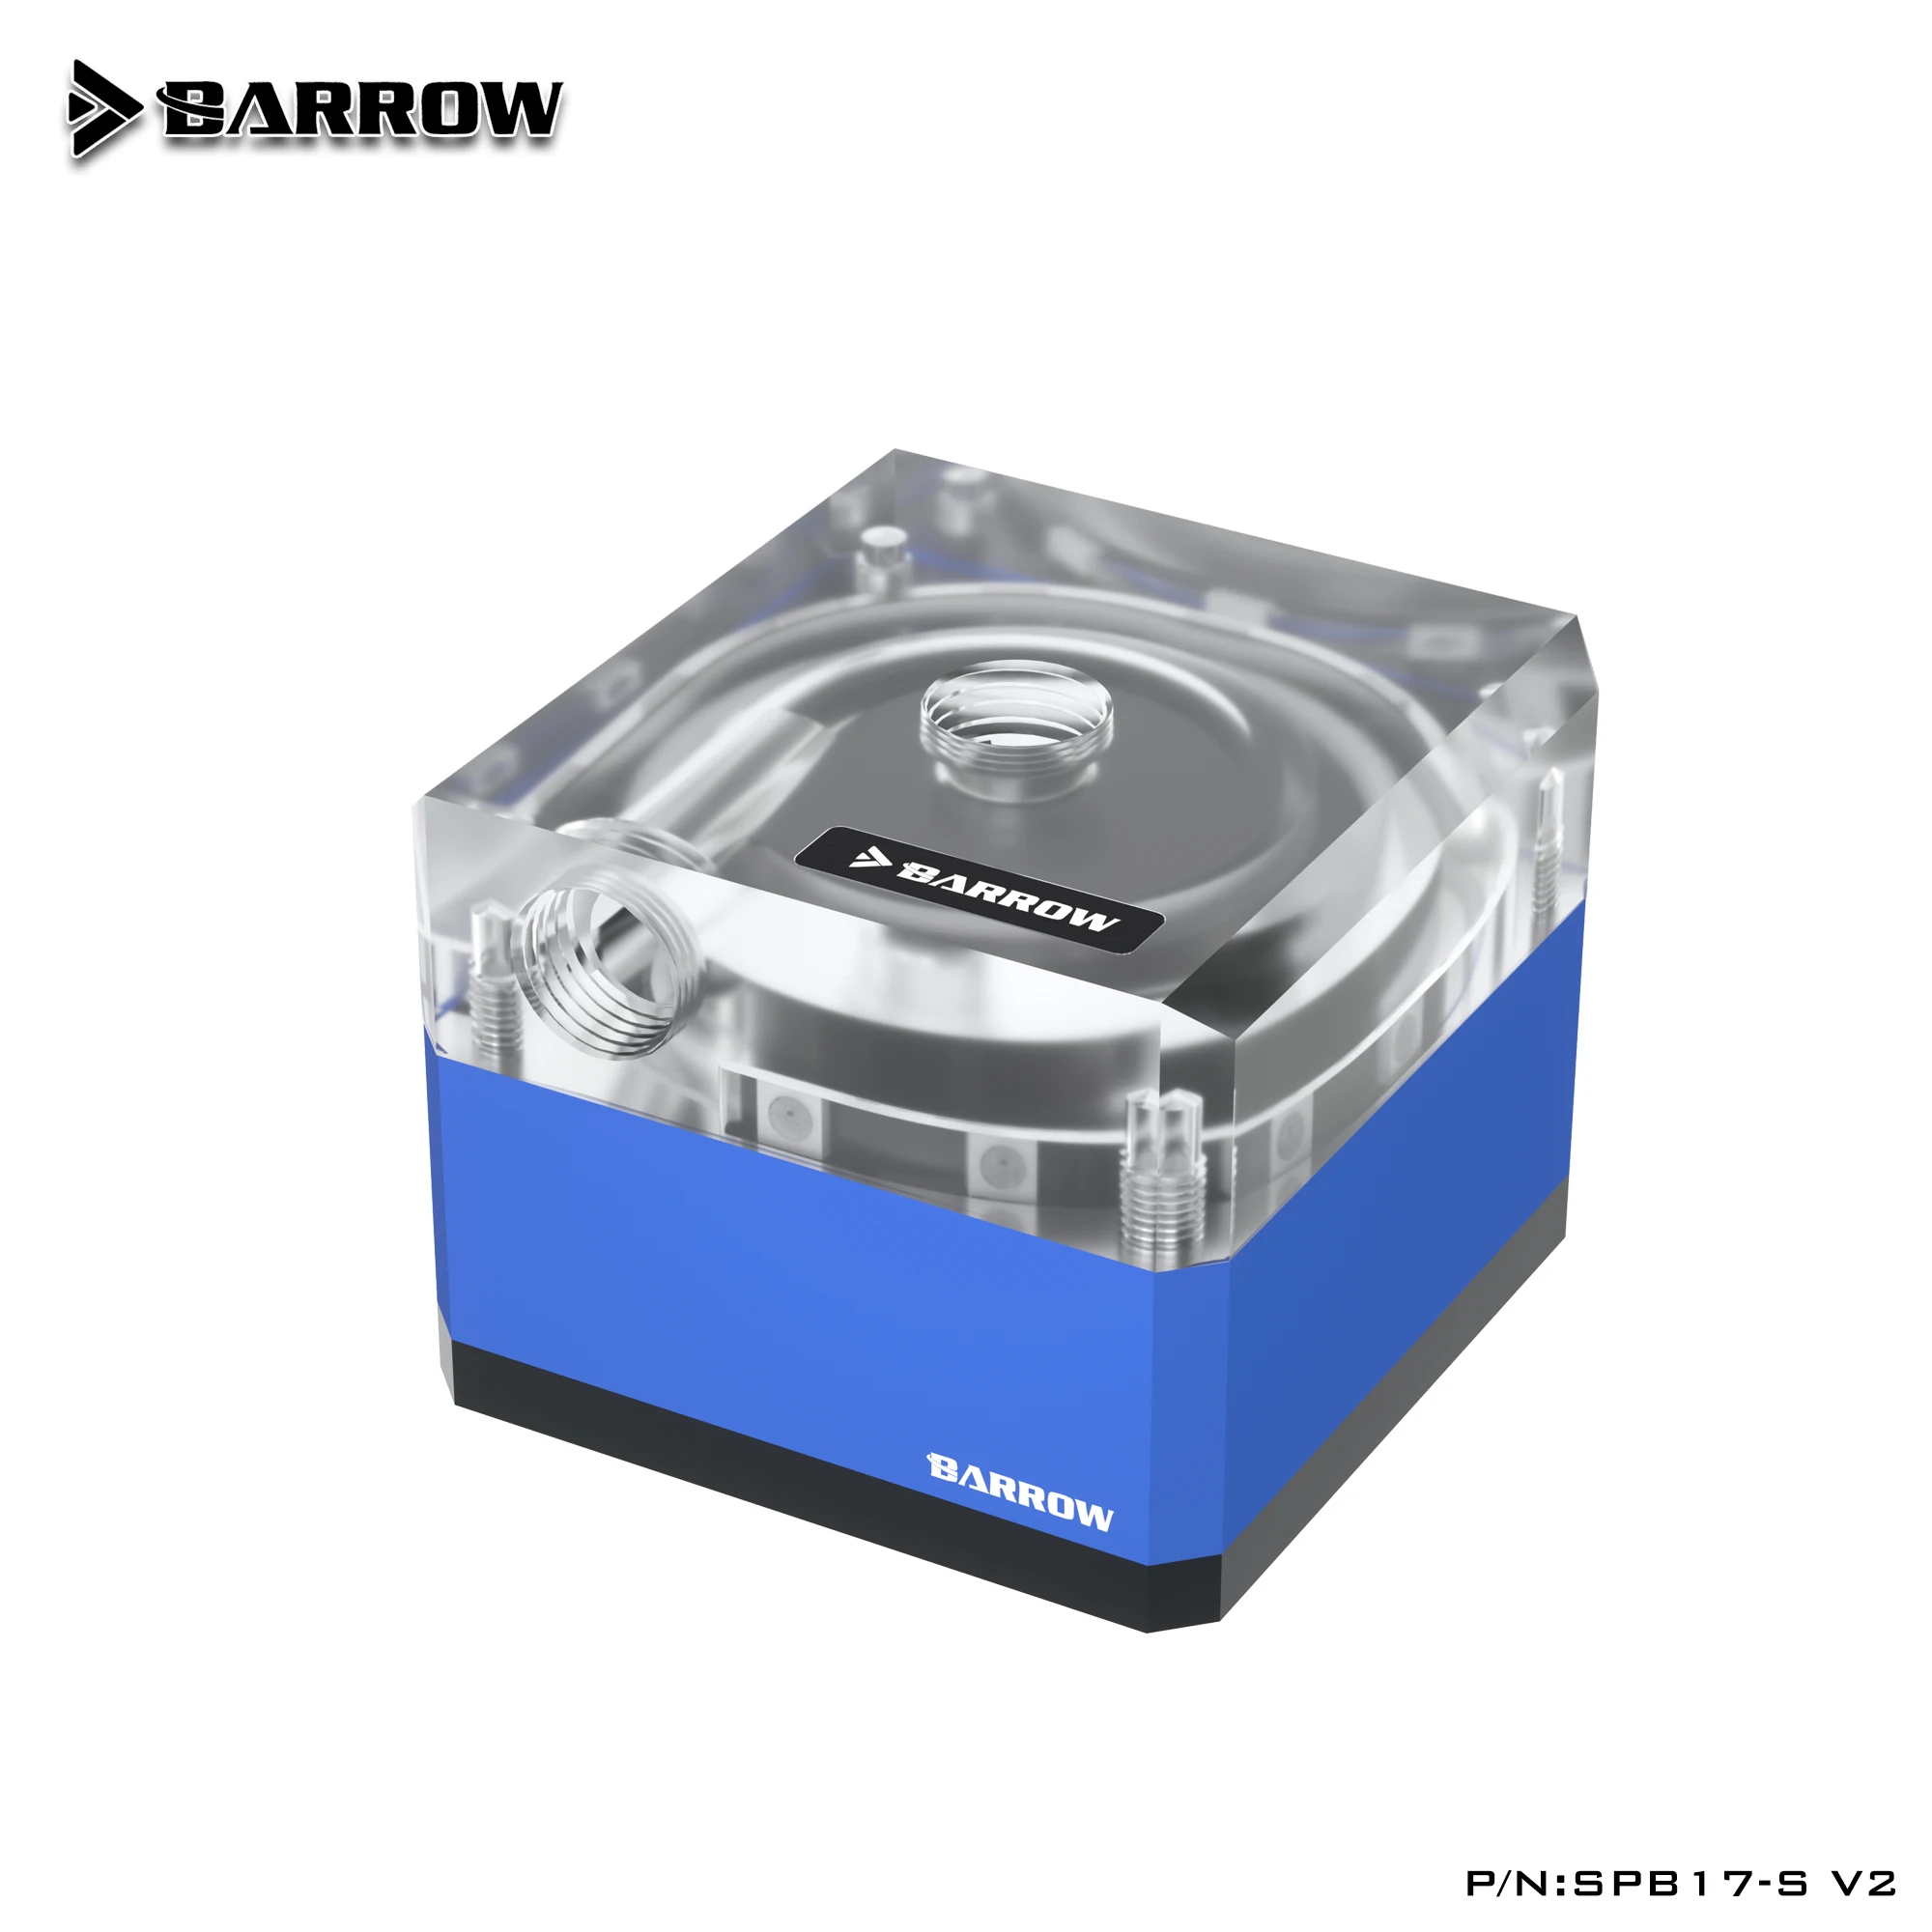 

Barrow DDC 17W PWM PCWater Cooler Pump DV12 Maximum Flow Lift 5.5 Meters 960L/H G1/4 Threaded for Computer Water Cooling System